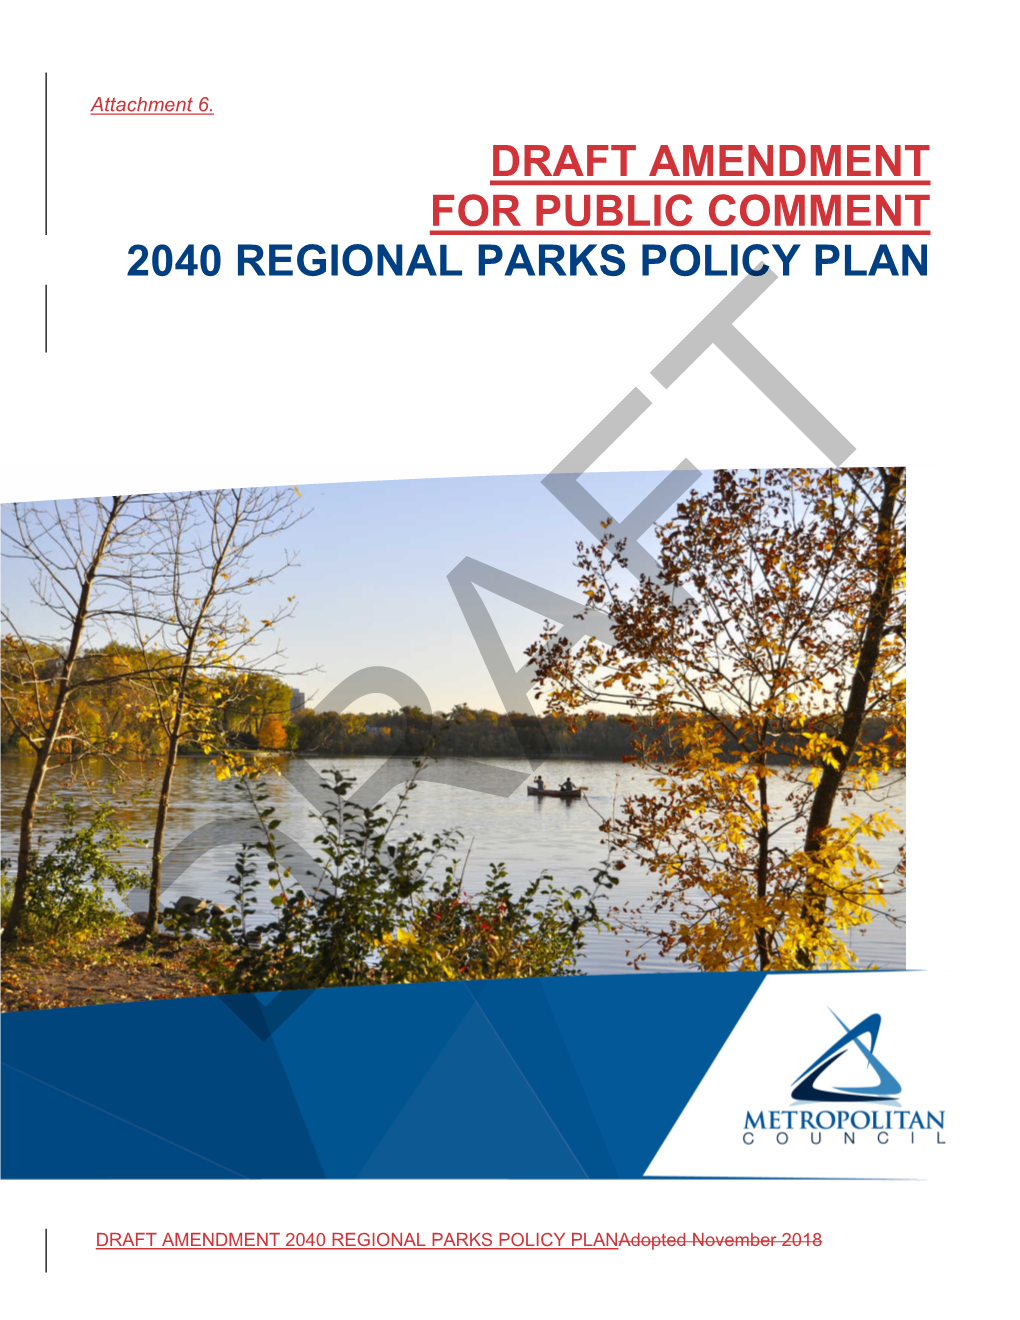 Draft Amendment to the 2040 Regional Parks Policy Plan